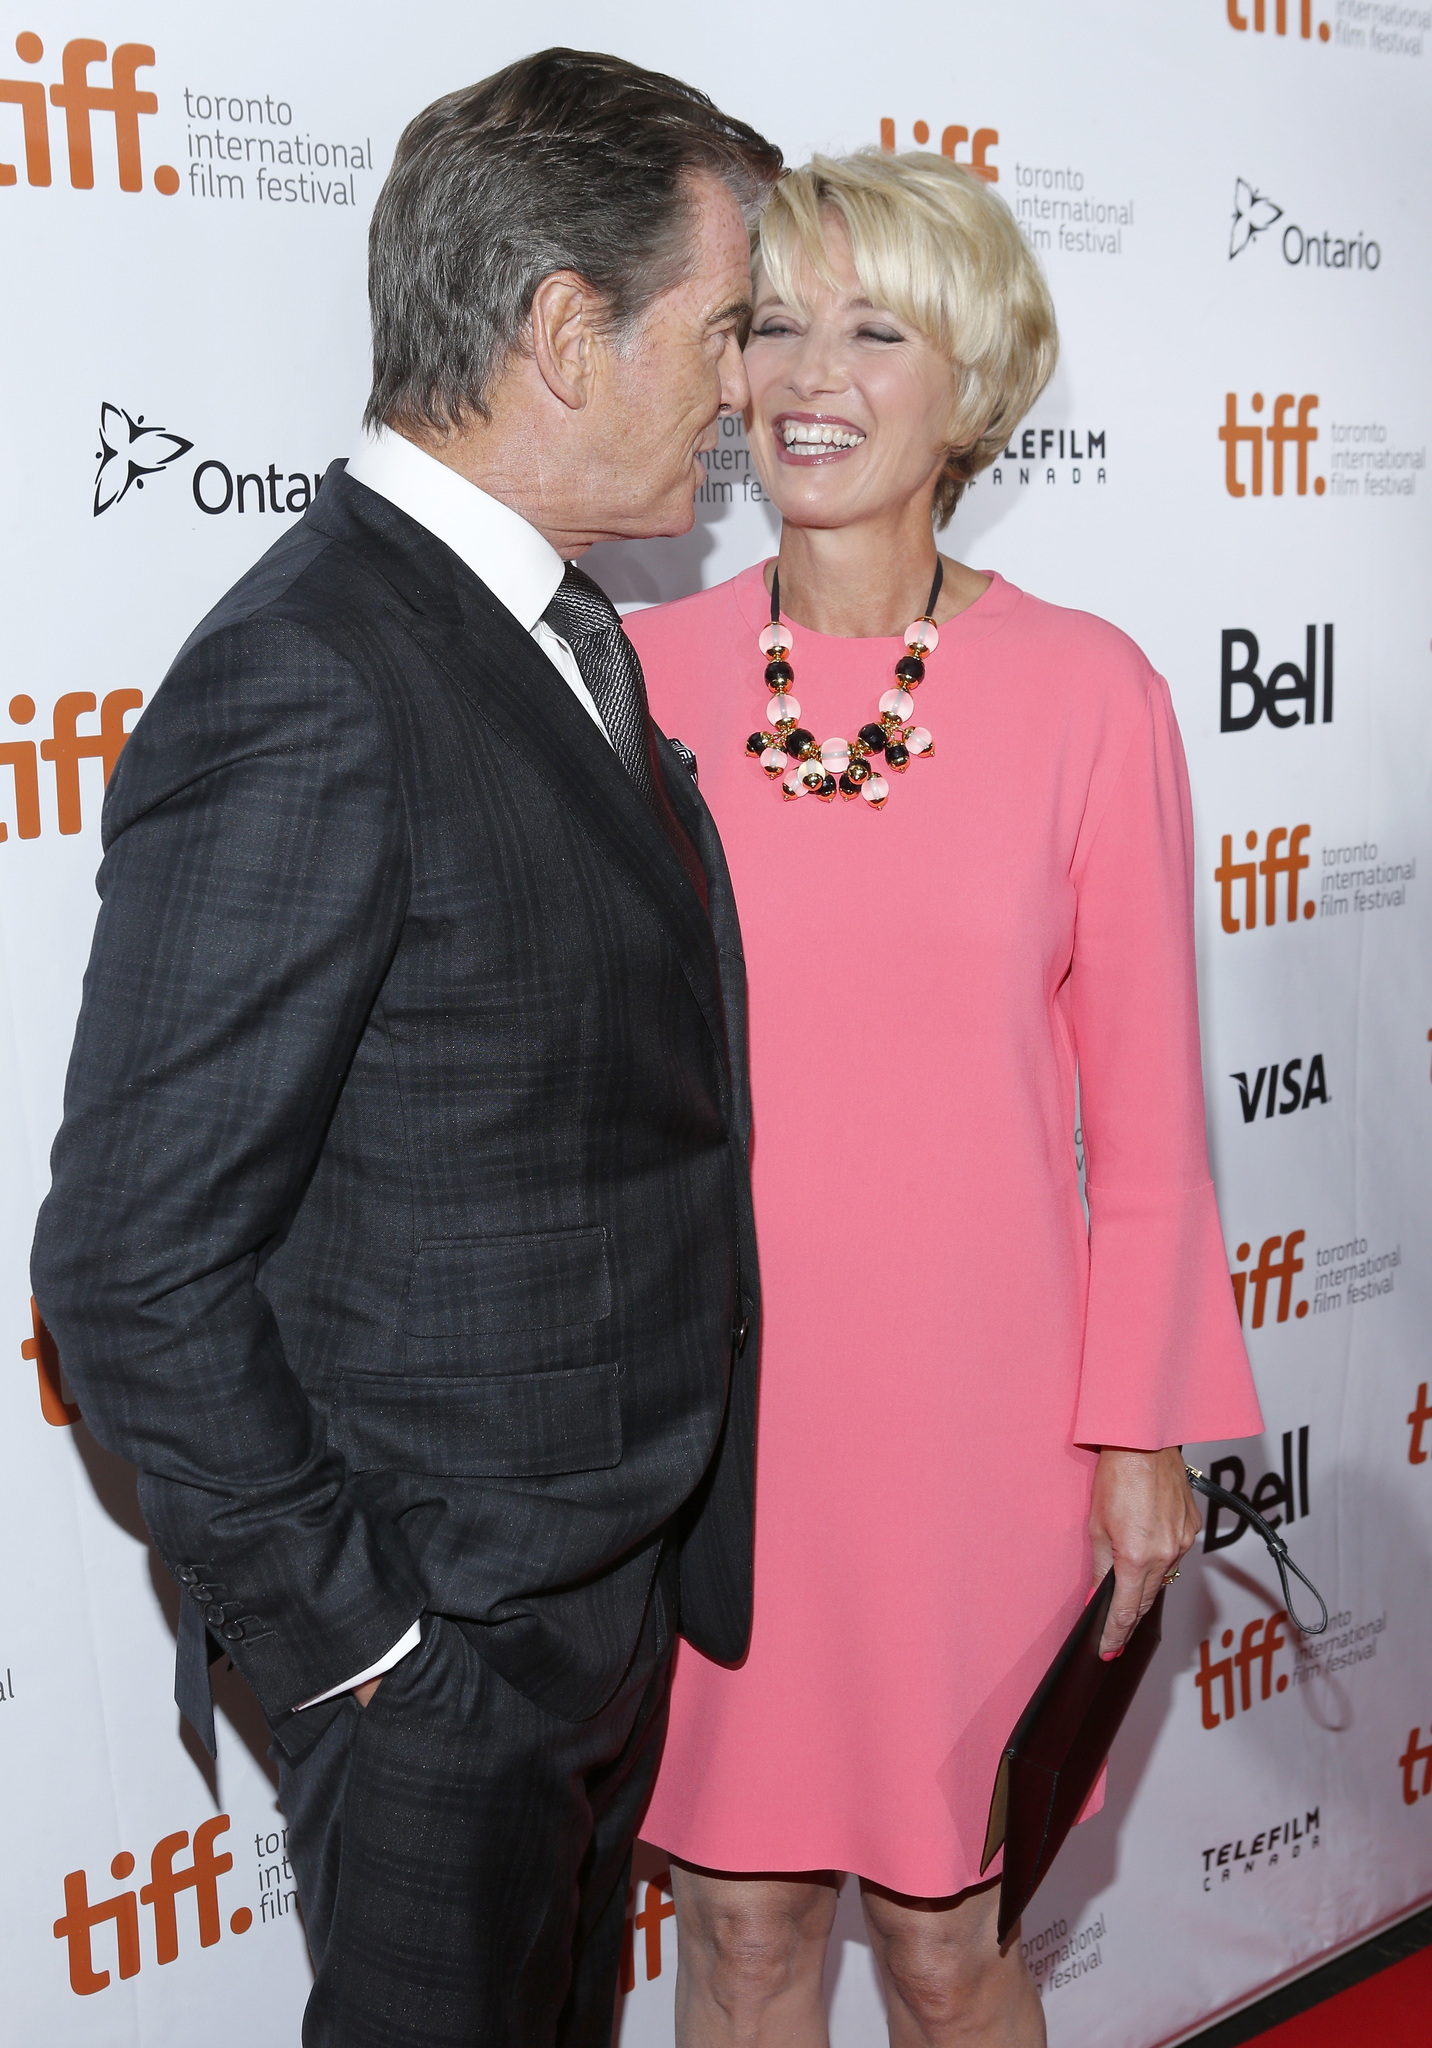 Pierce Brosnan and Emma Thompson at event of Meiles punsas (2013)